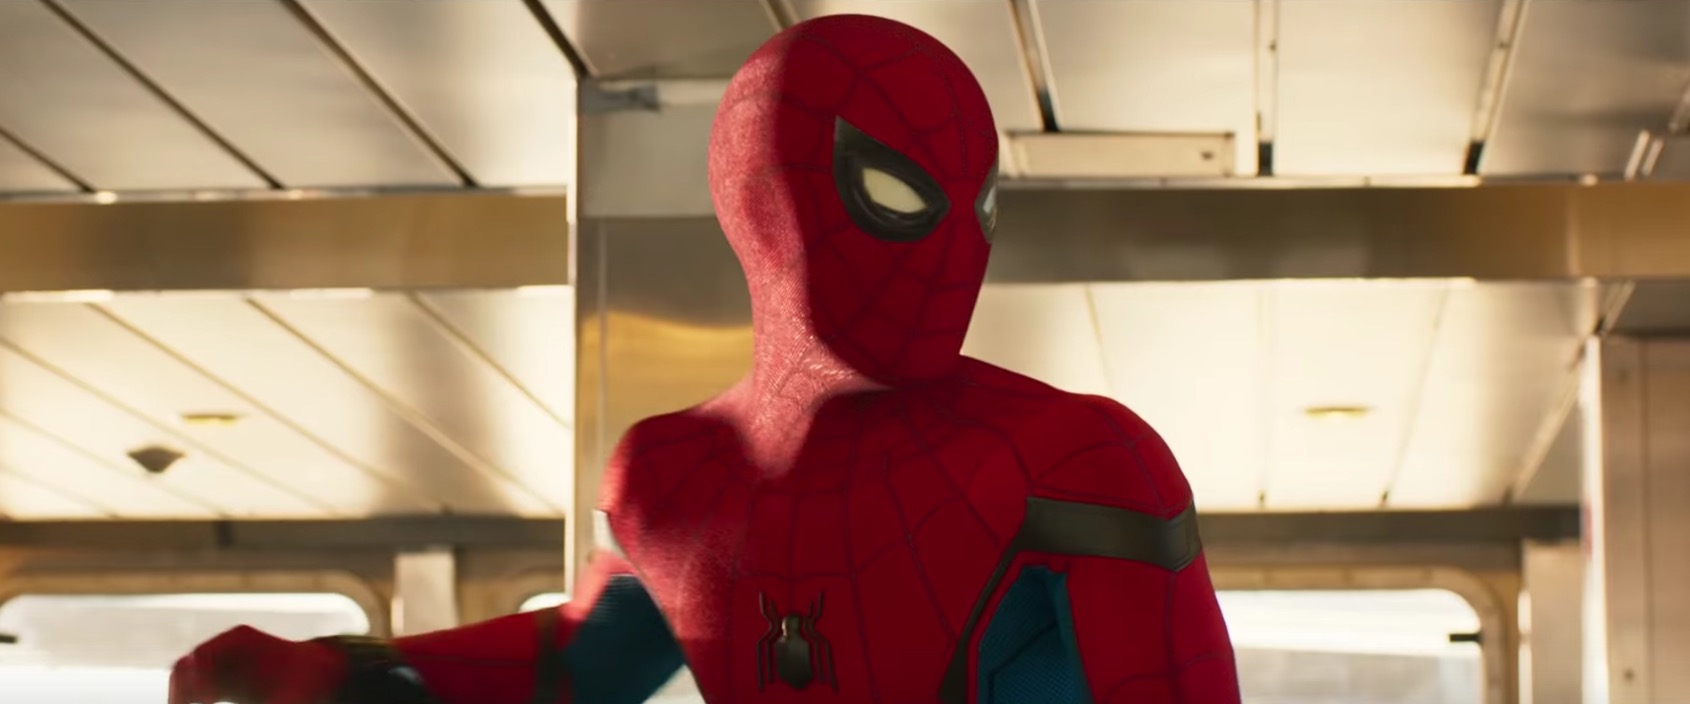 How Spider-Man: Homecoming Will Distinguish Itself From The Other Spider-Man Movies